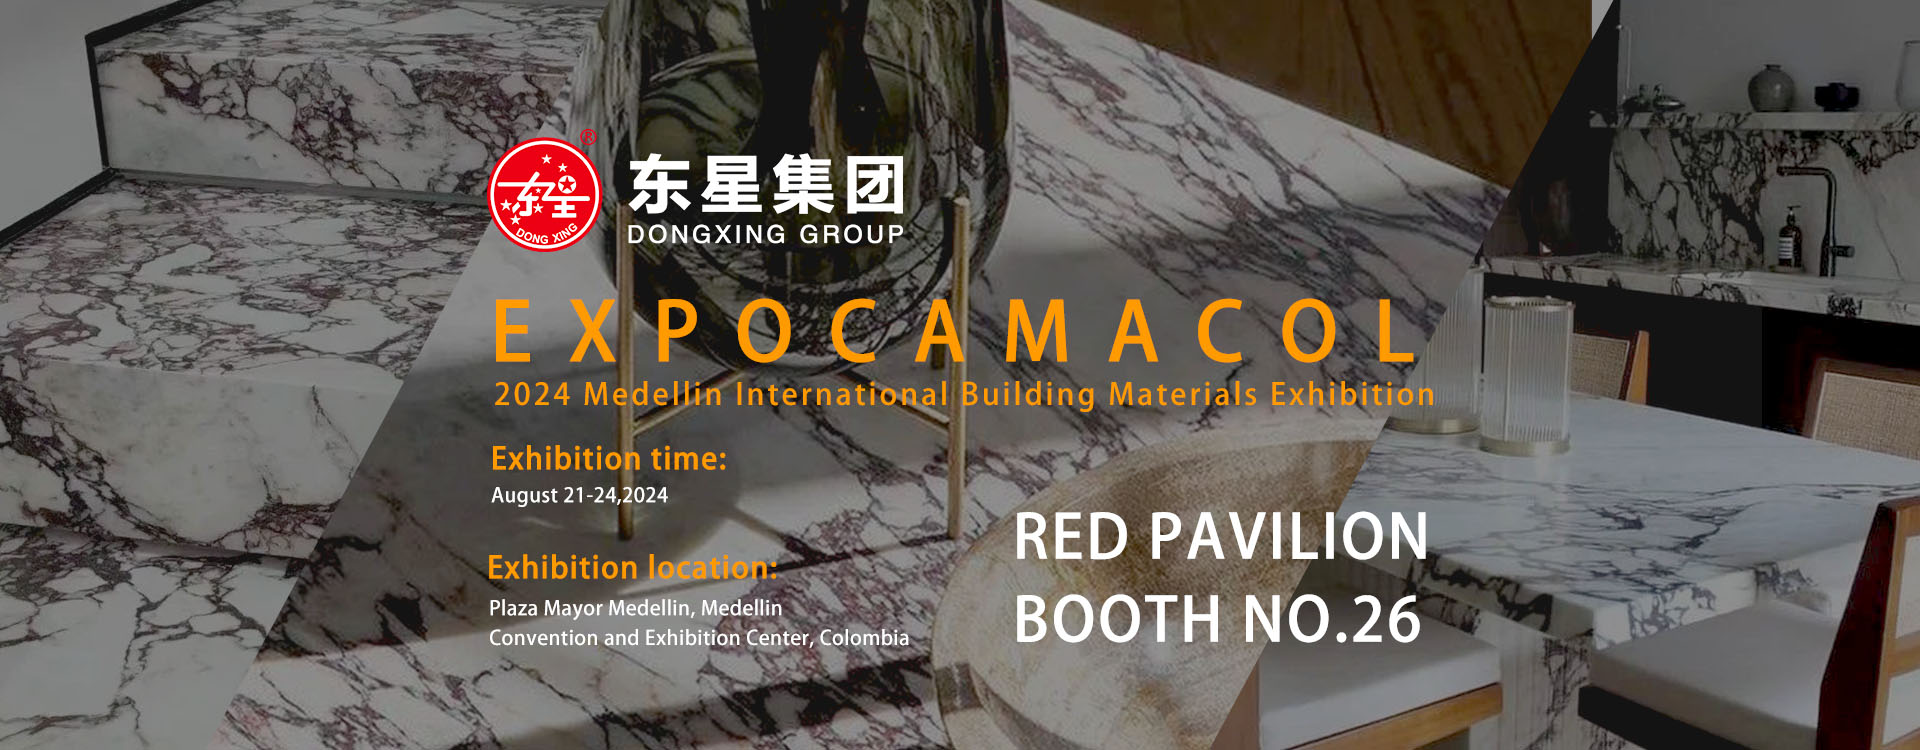 Dongxing Group is joining EXPOCAMACOL 2024